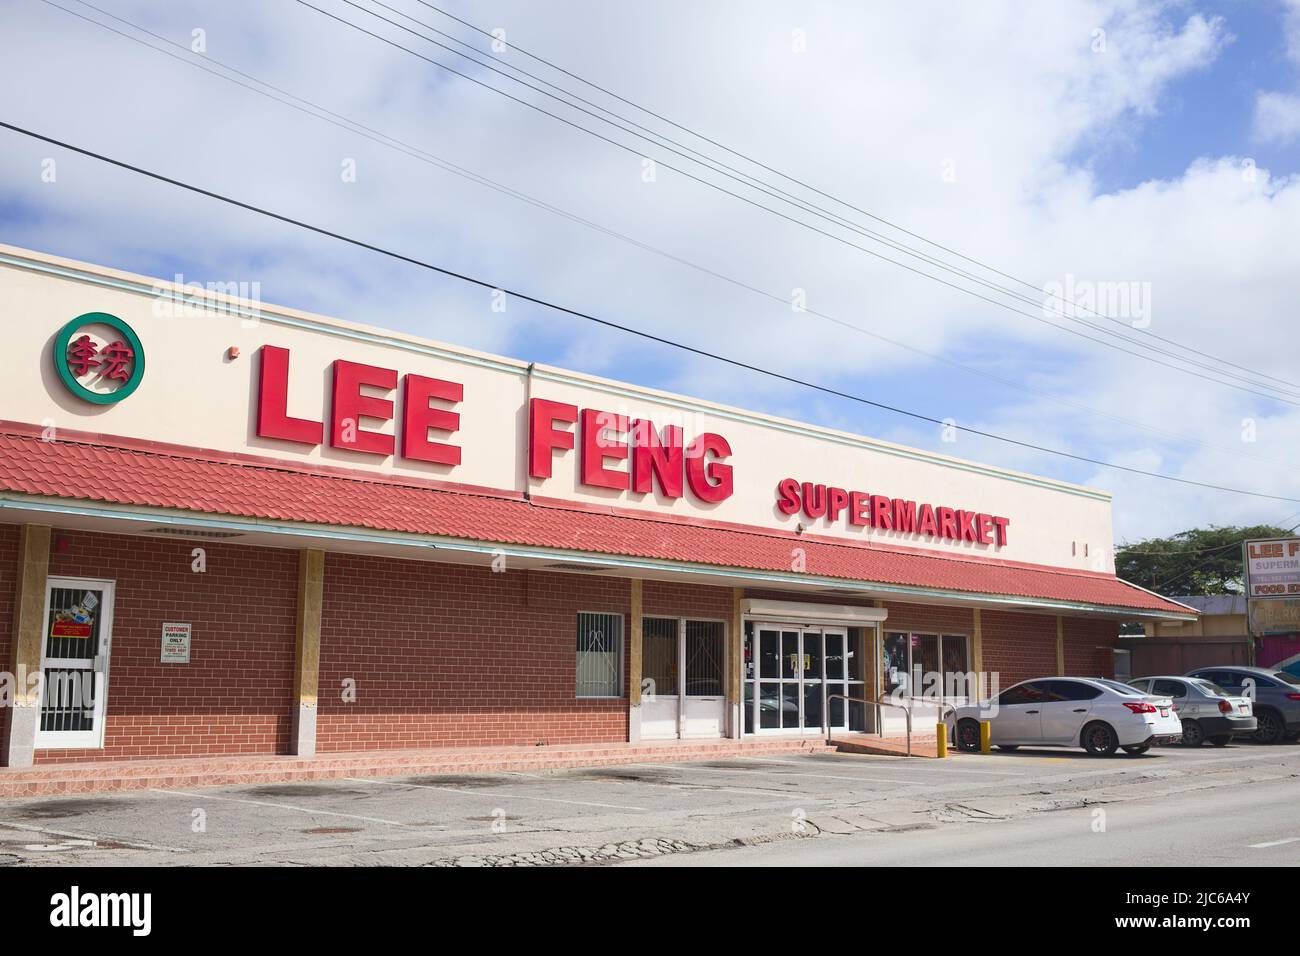 ORANJESTAD, ARUBA - DECEMBER 4, 2021: Lee Feng supermarket, one of the many  Chinese grocery stores on Aruba, located along Nassaustraat in Oranjestad  Stock Photo - Alamy